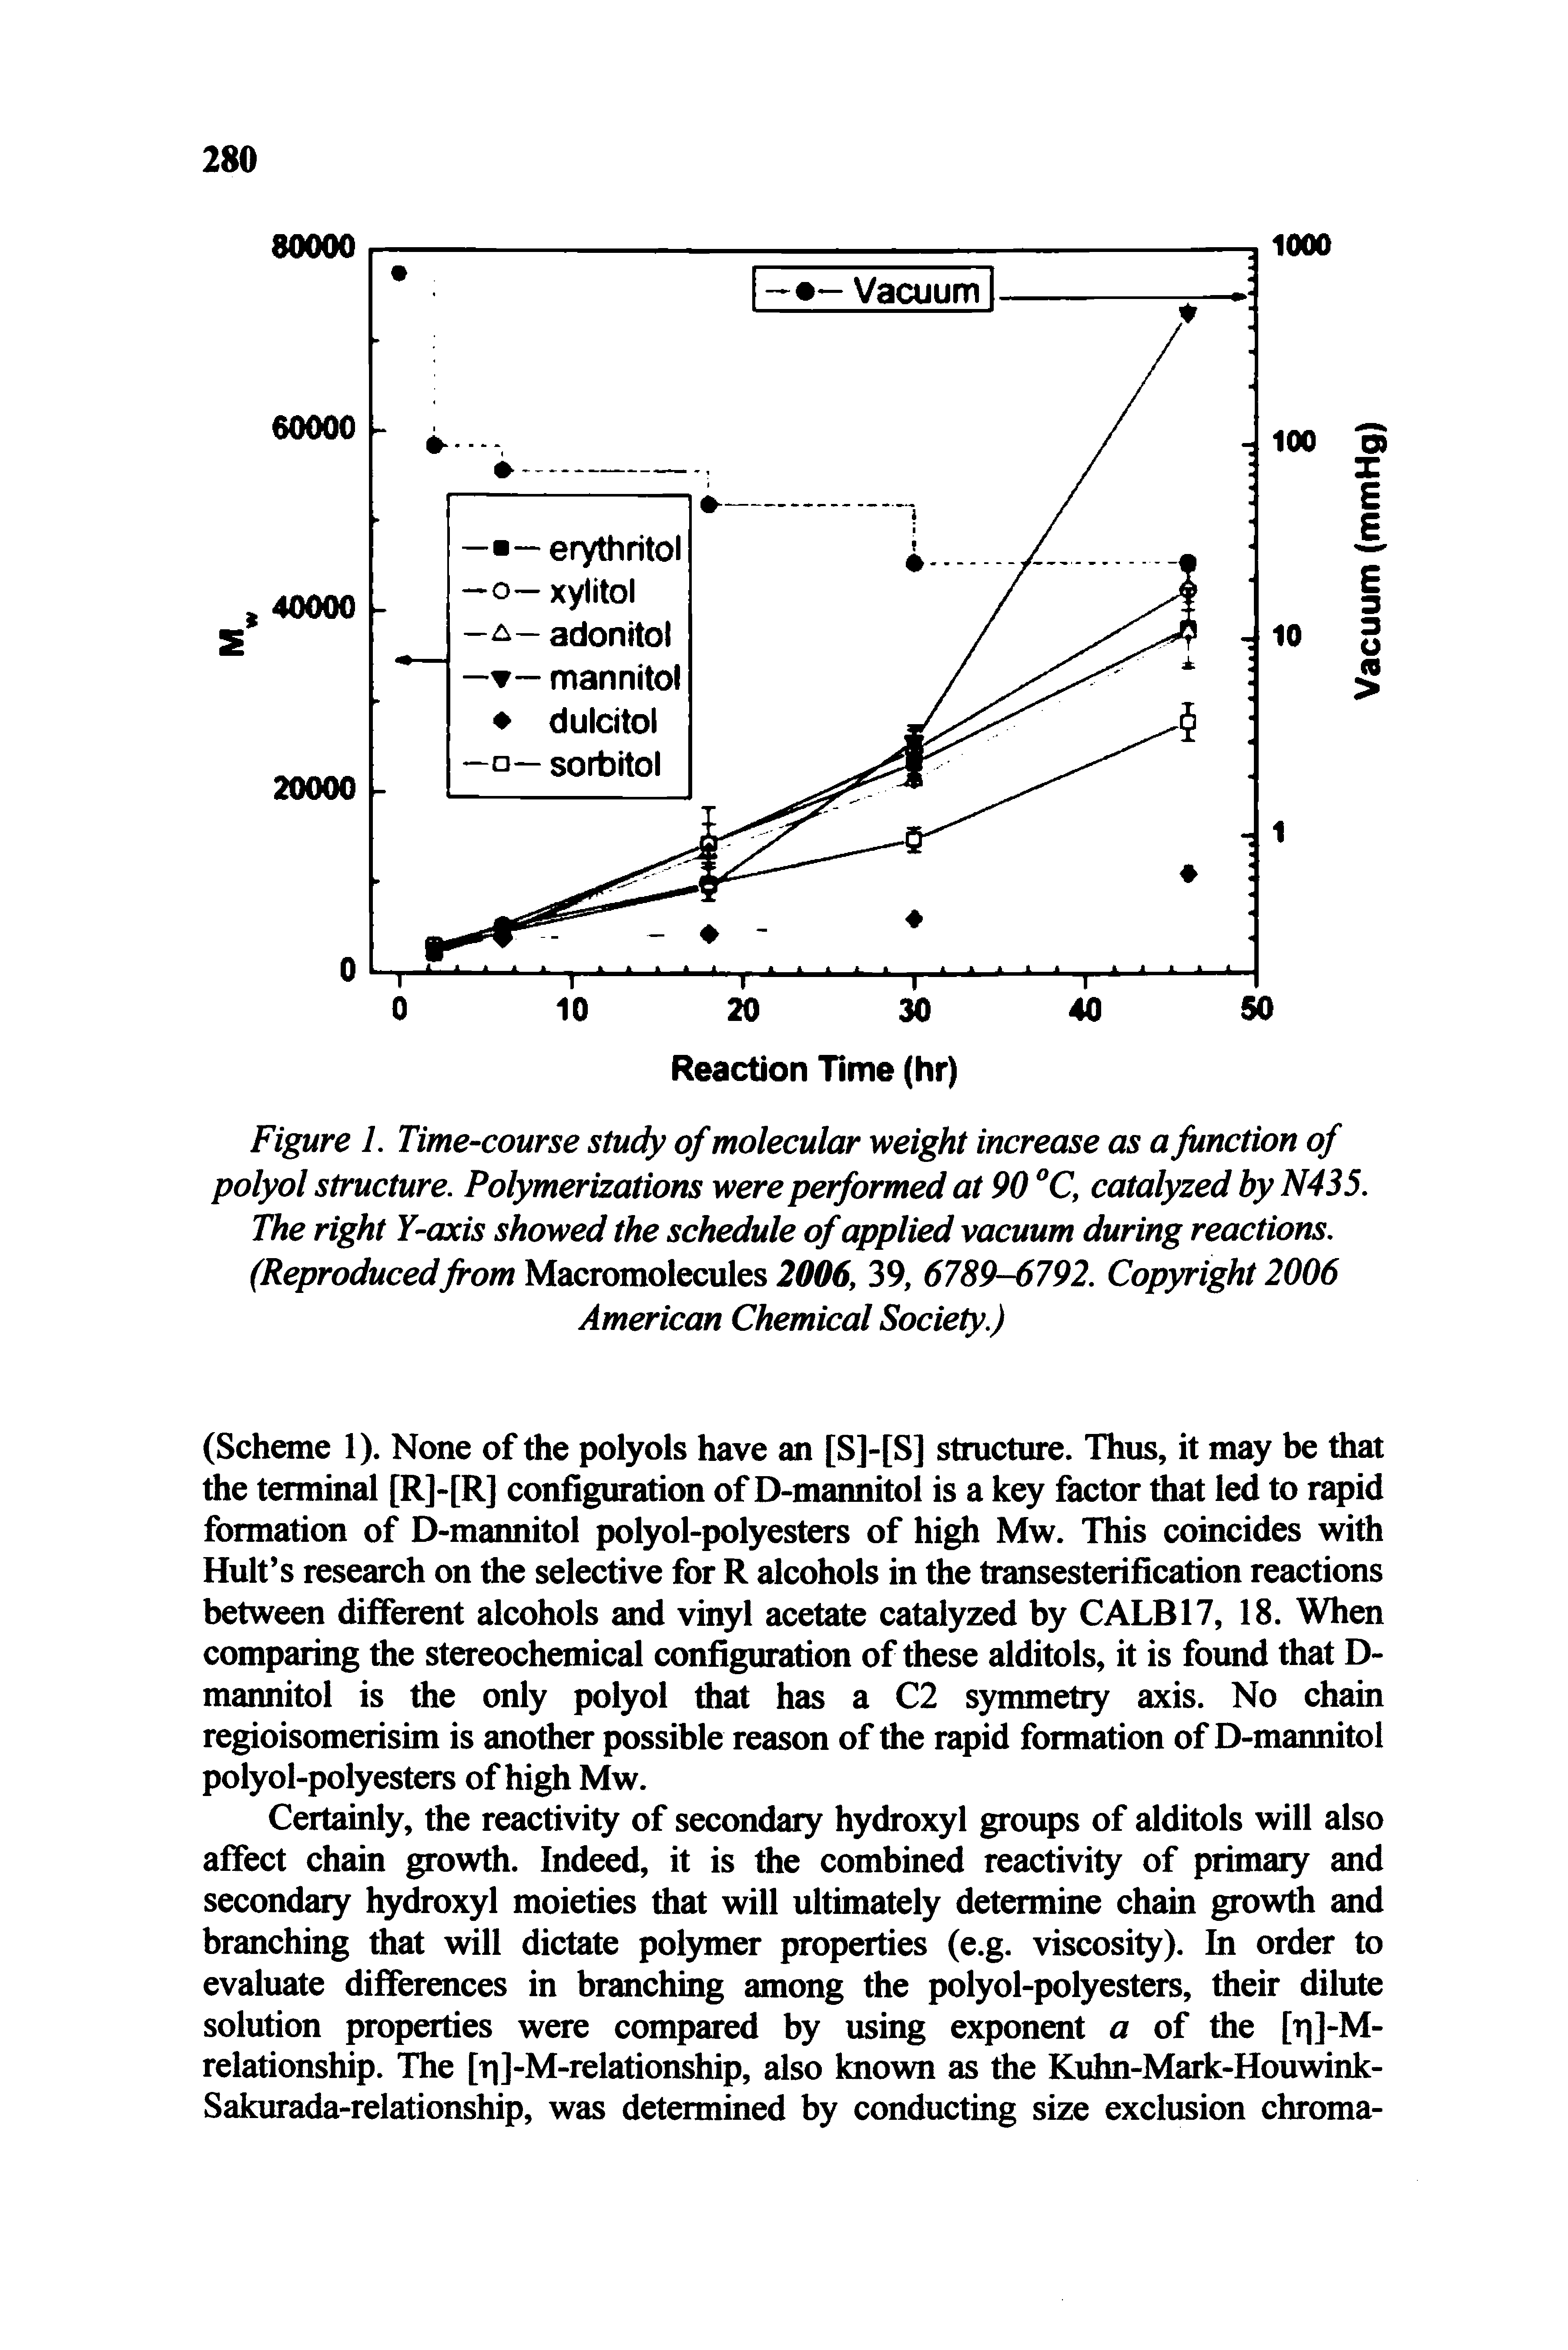 Figure 1. Time-course study of molecular weight increase as a function of polyol structure. Polymerizations were performed at 90 "C, catalyzed by N435. The right Y-axis showed the schedule of applied vacuum during reactions. (Reproducedfrom Macromolecules 2006, 39, 6789-6792. Copyright 2006 American Chemical Society.)...